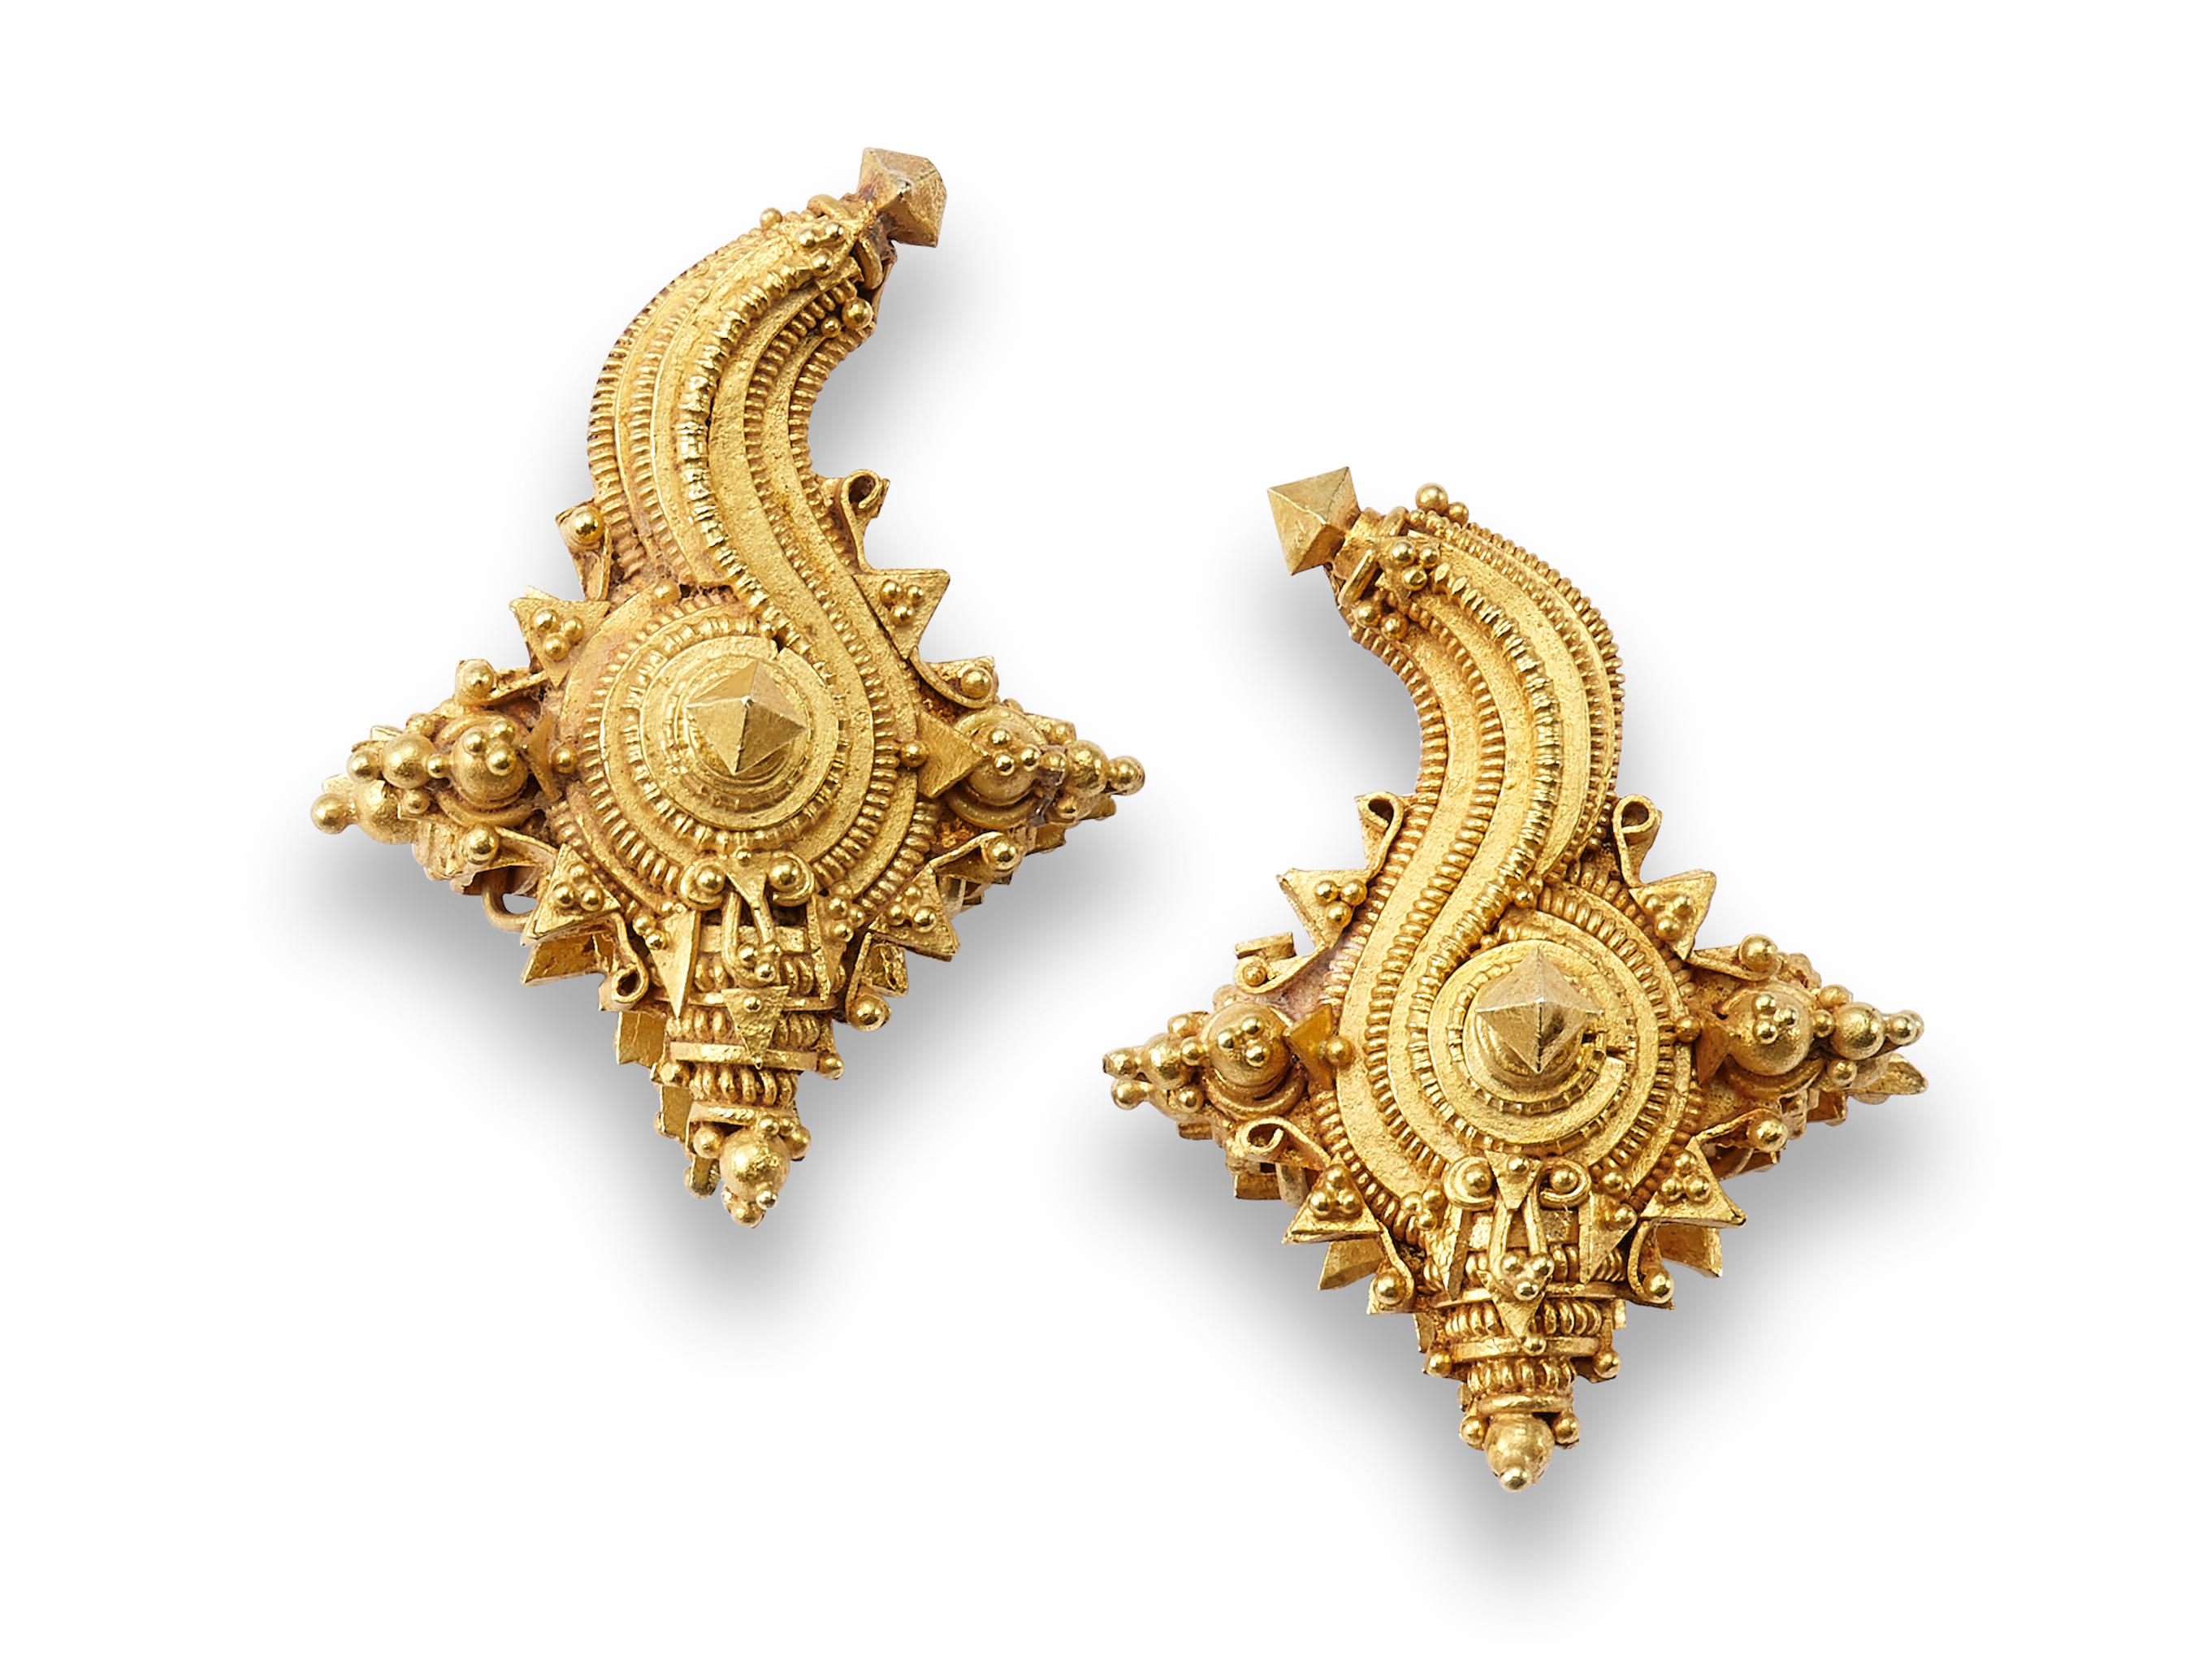 A PAIR OF CONCH-SHAPED GOLD FILIGREE EARRINGS JAVA, INDONESIA, 10TH-15TH CENTURY (2)